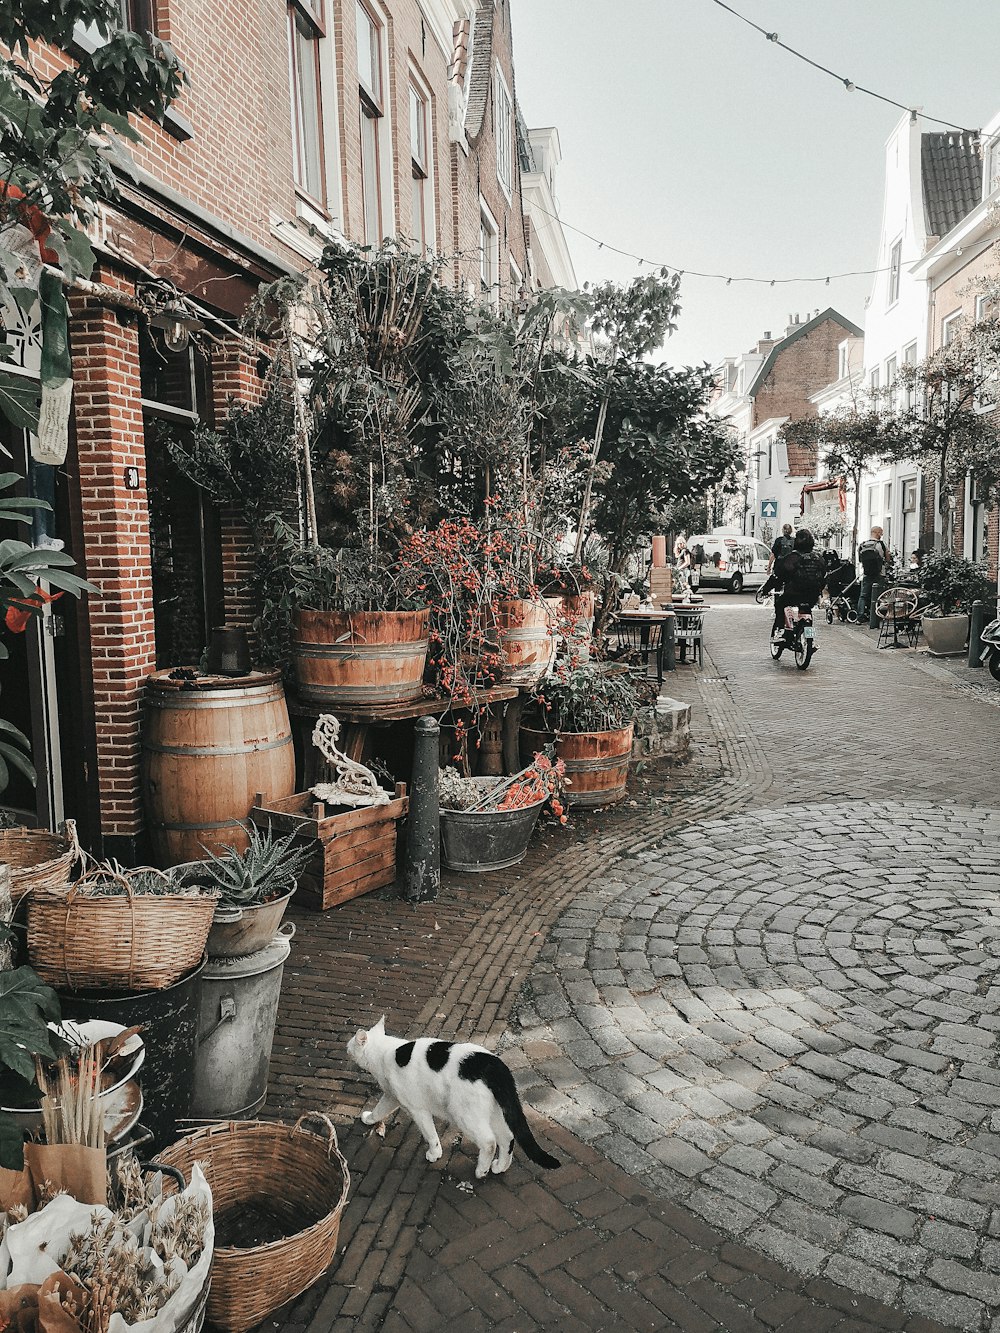 a black and white cat walking down a brick street